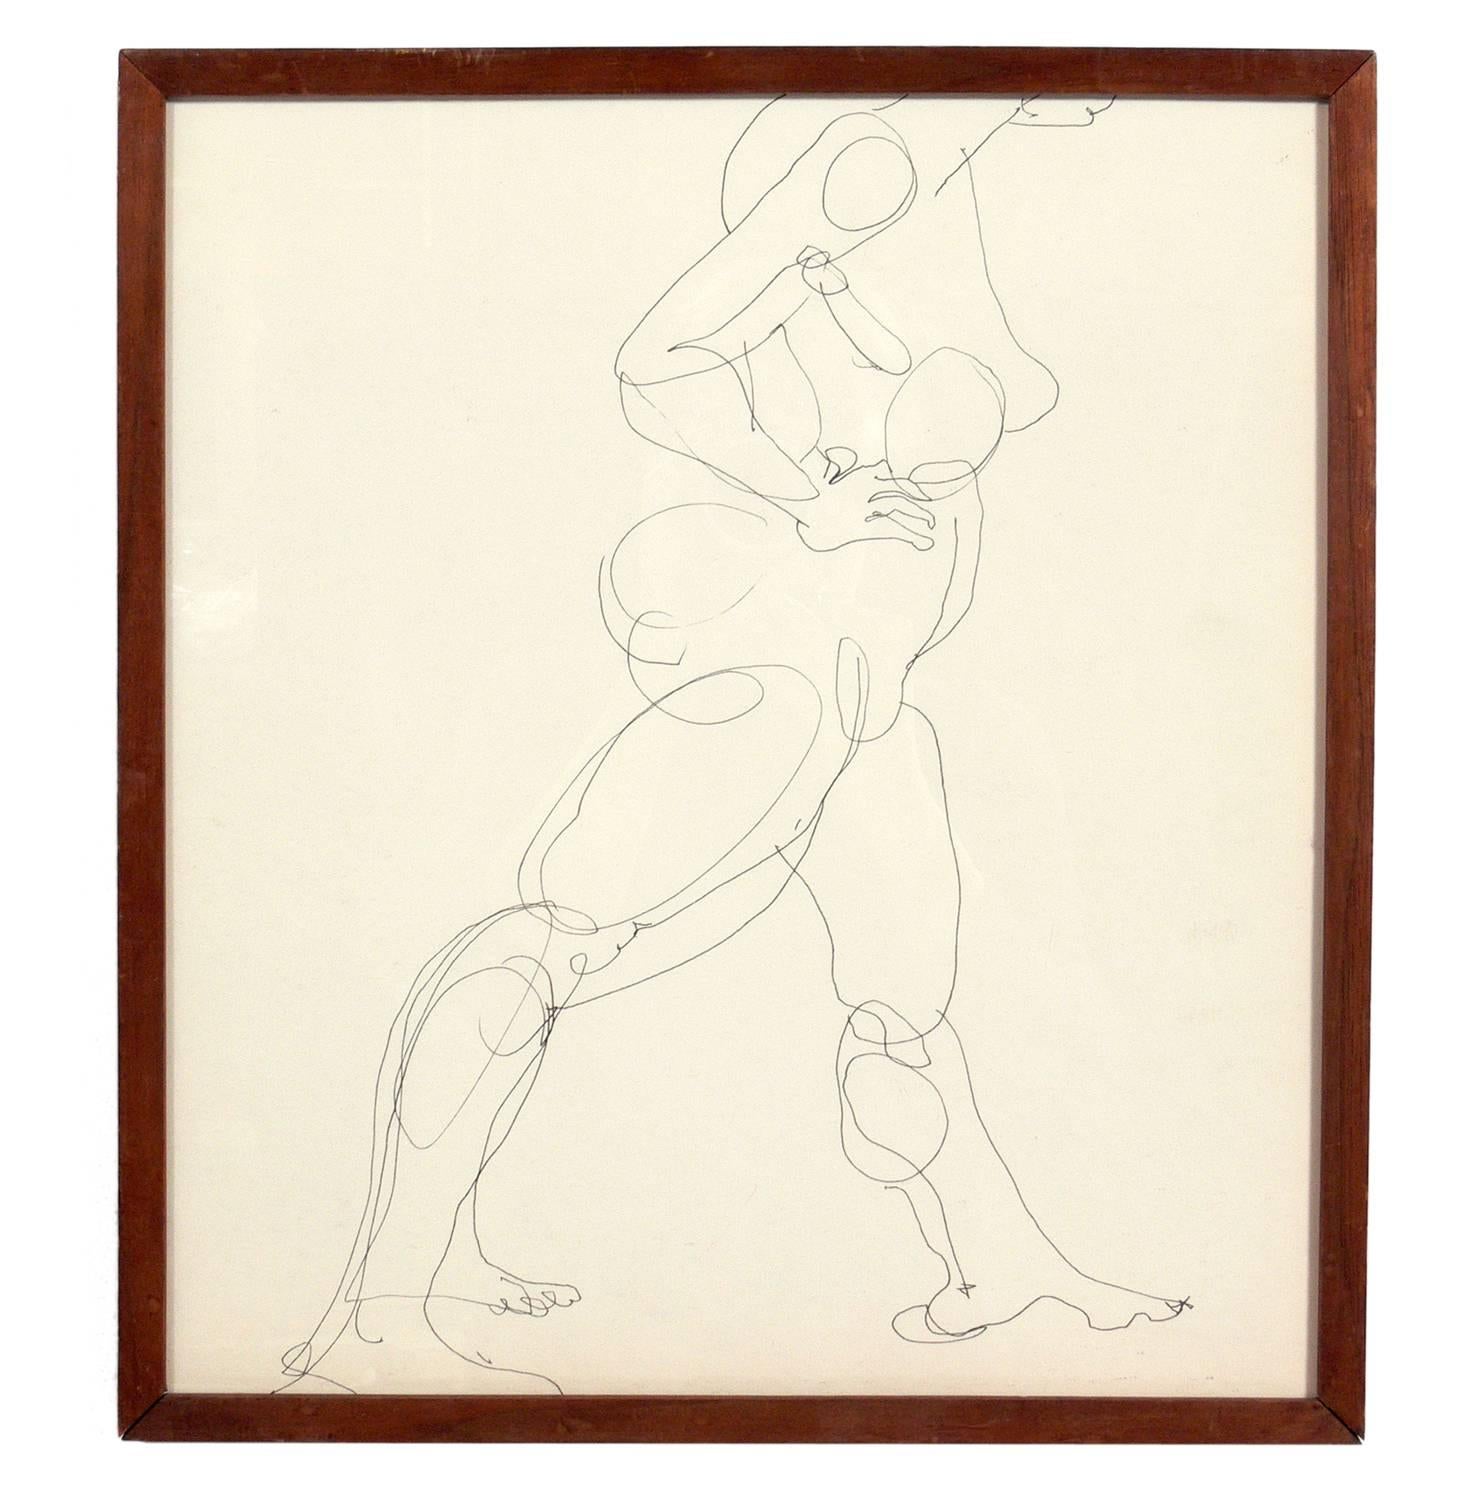 Paper Selection of Figural Line Drawings or Gallery Wall by Miriam Kubach